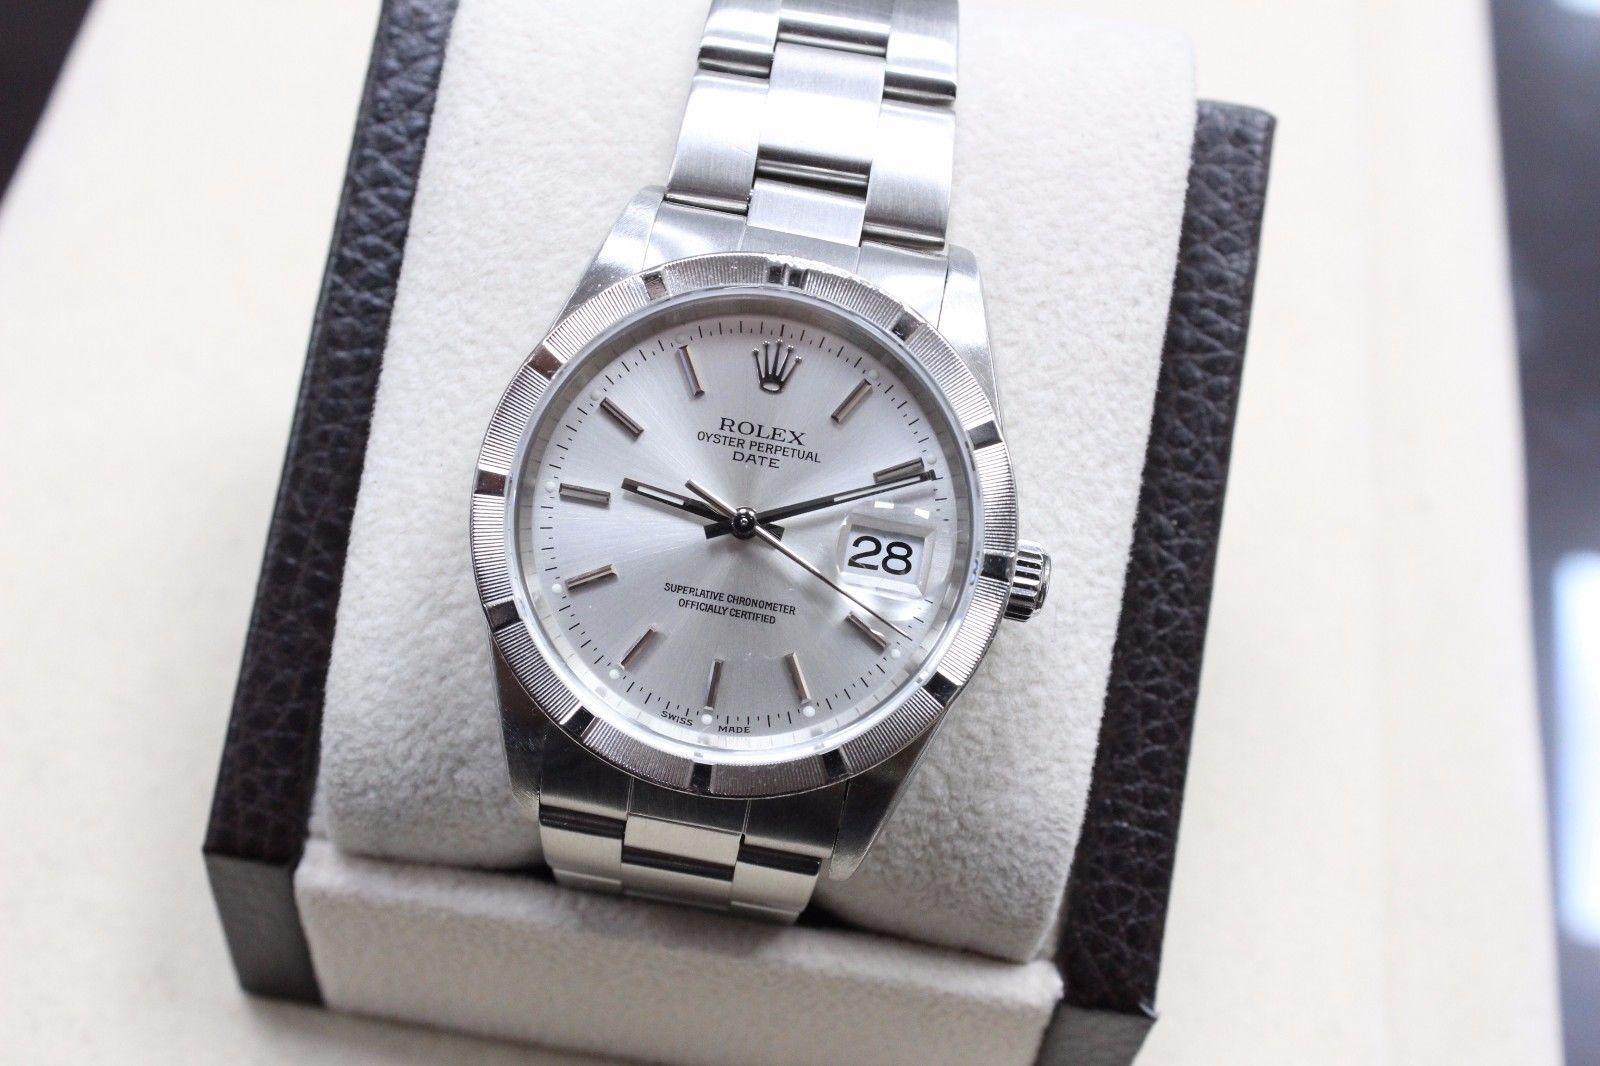 Style Number: 15210

Serial: F203***

Year: 2003

Model: Date

Case: Stainless Steel 

Band: Stainless Steel 

Bezel: Stainless Steel 

Dial: Silver

Face: Sapphire Crystal

Case Size: 34mm

Includes: 

-Elegant Watch Box

-Certified Appraisal 

-6